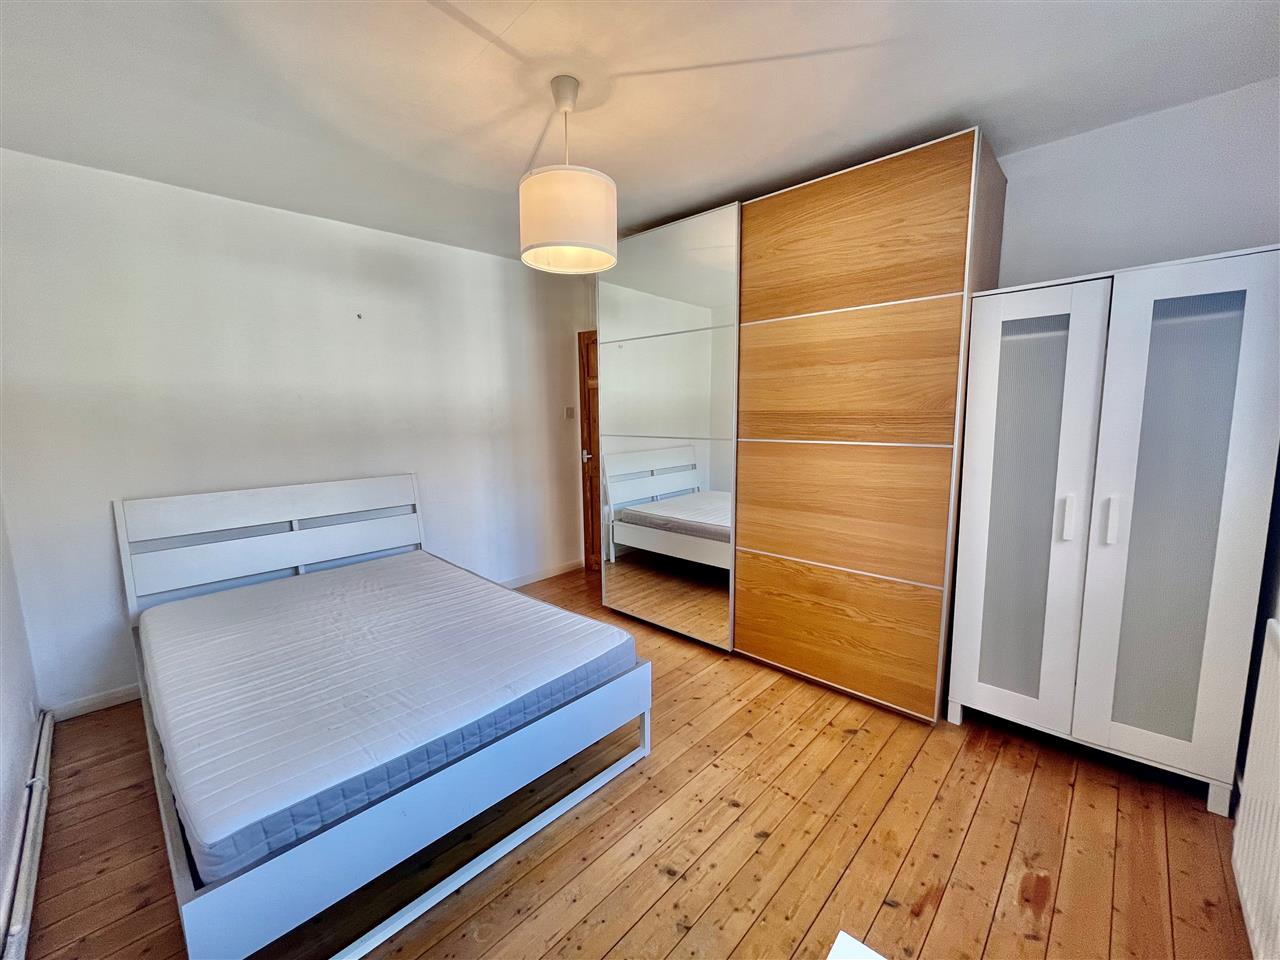 AVAILABLE IMMEDIATELY. Located within moments of Tufnell Park underground station (Northern Line) is this first floor purpose built FURNISHED flat. The accommodation comprises of one double bedroom, reception room, fully equipped kitchen and a newly renovated bathroom. The flat is perfectly ...